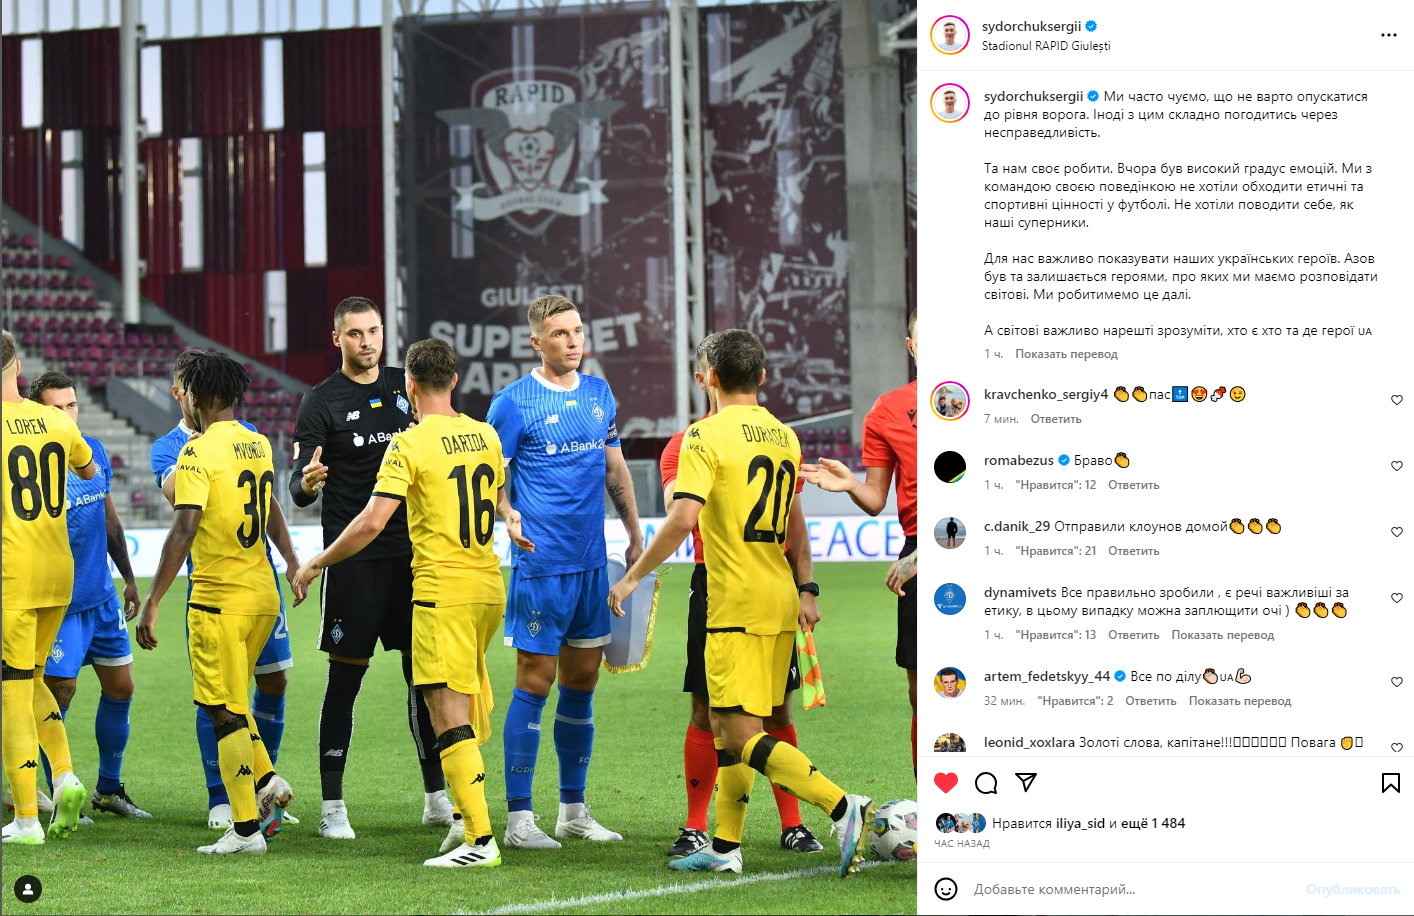 ''We didn't want to behave like rivals'': the Dynamo captain made a statement about the scuffle with Aris players